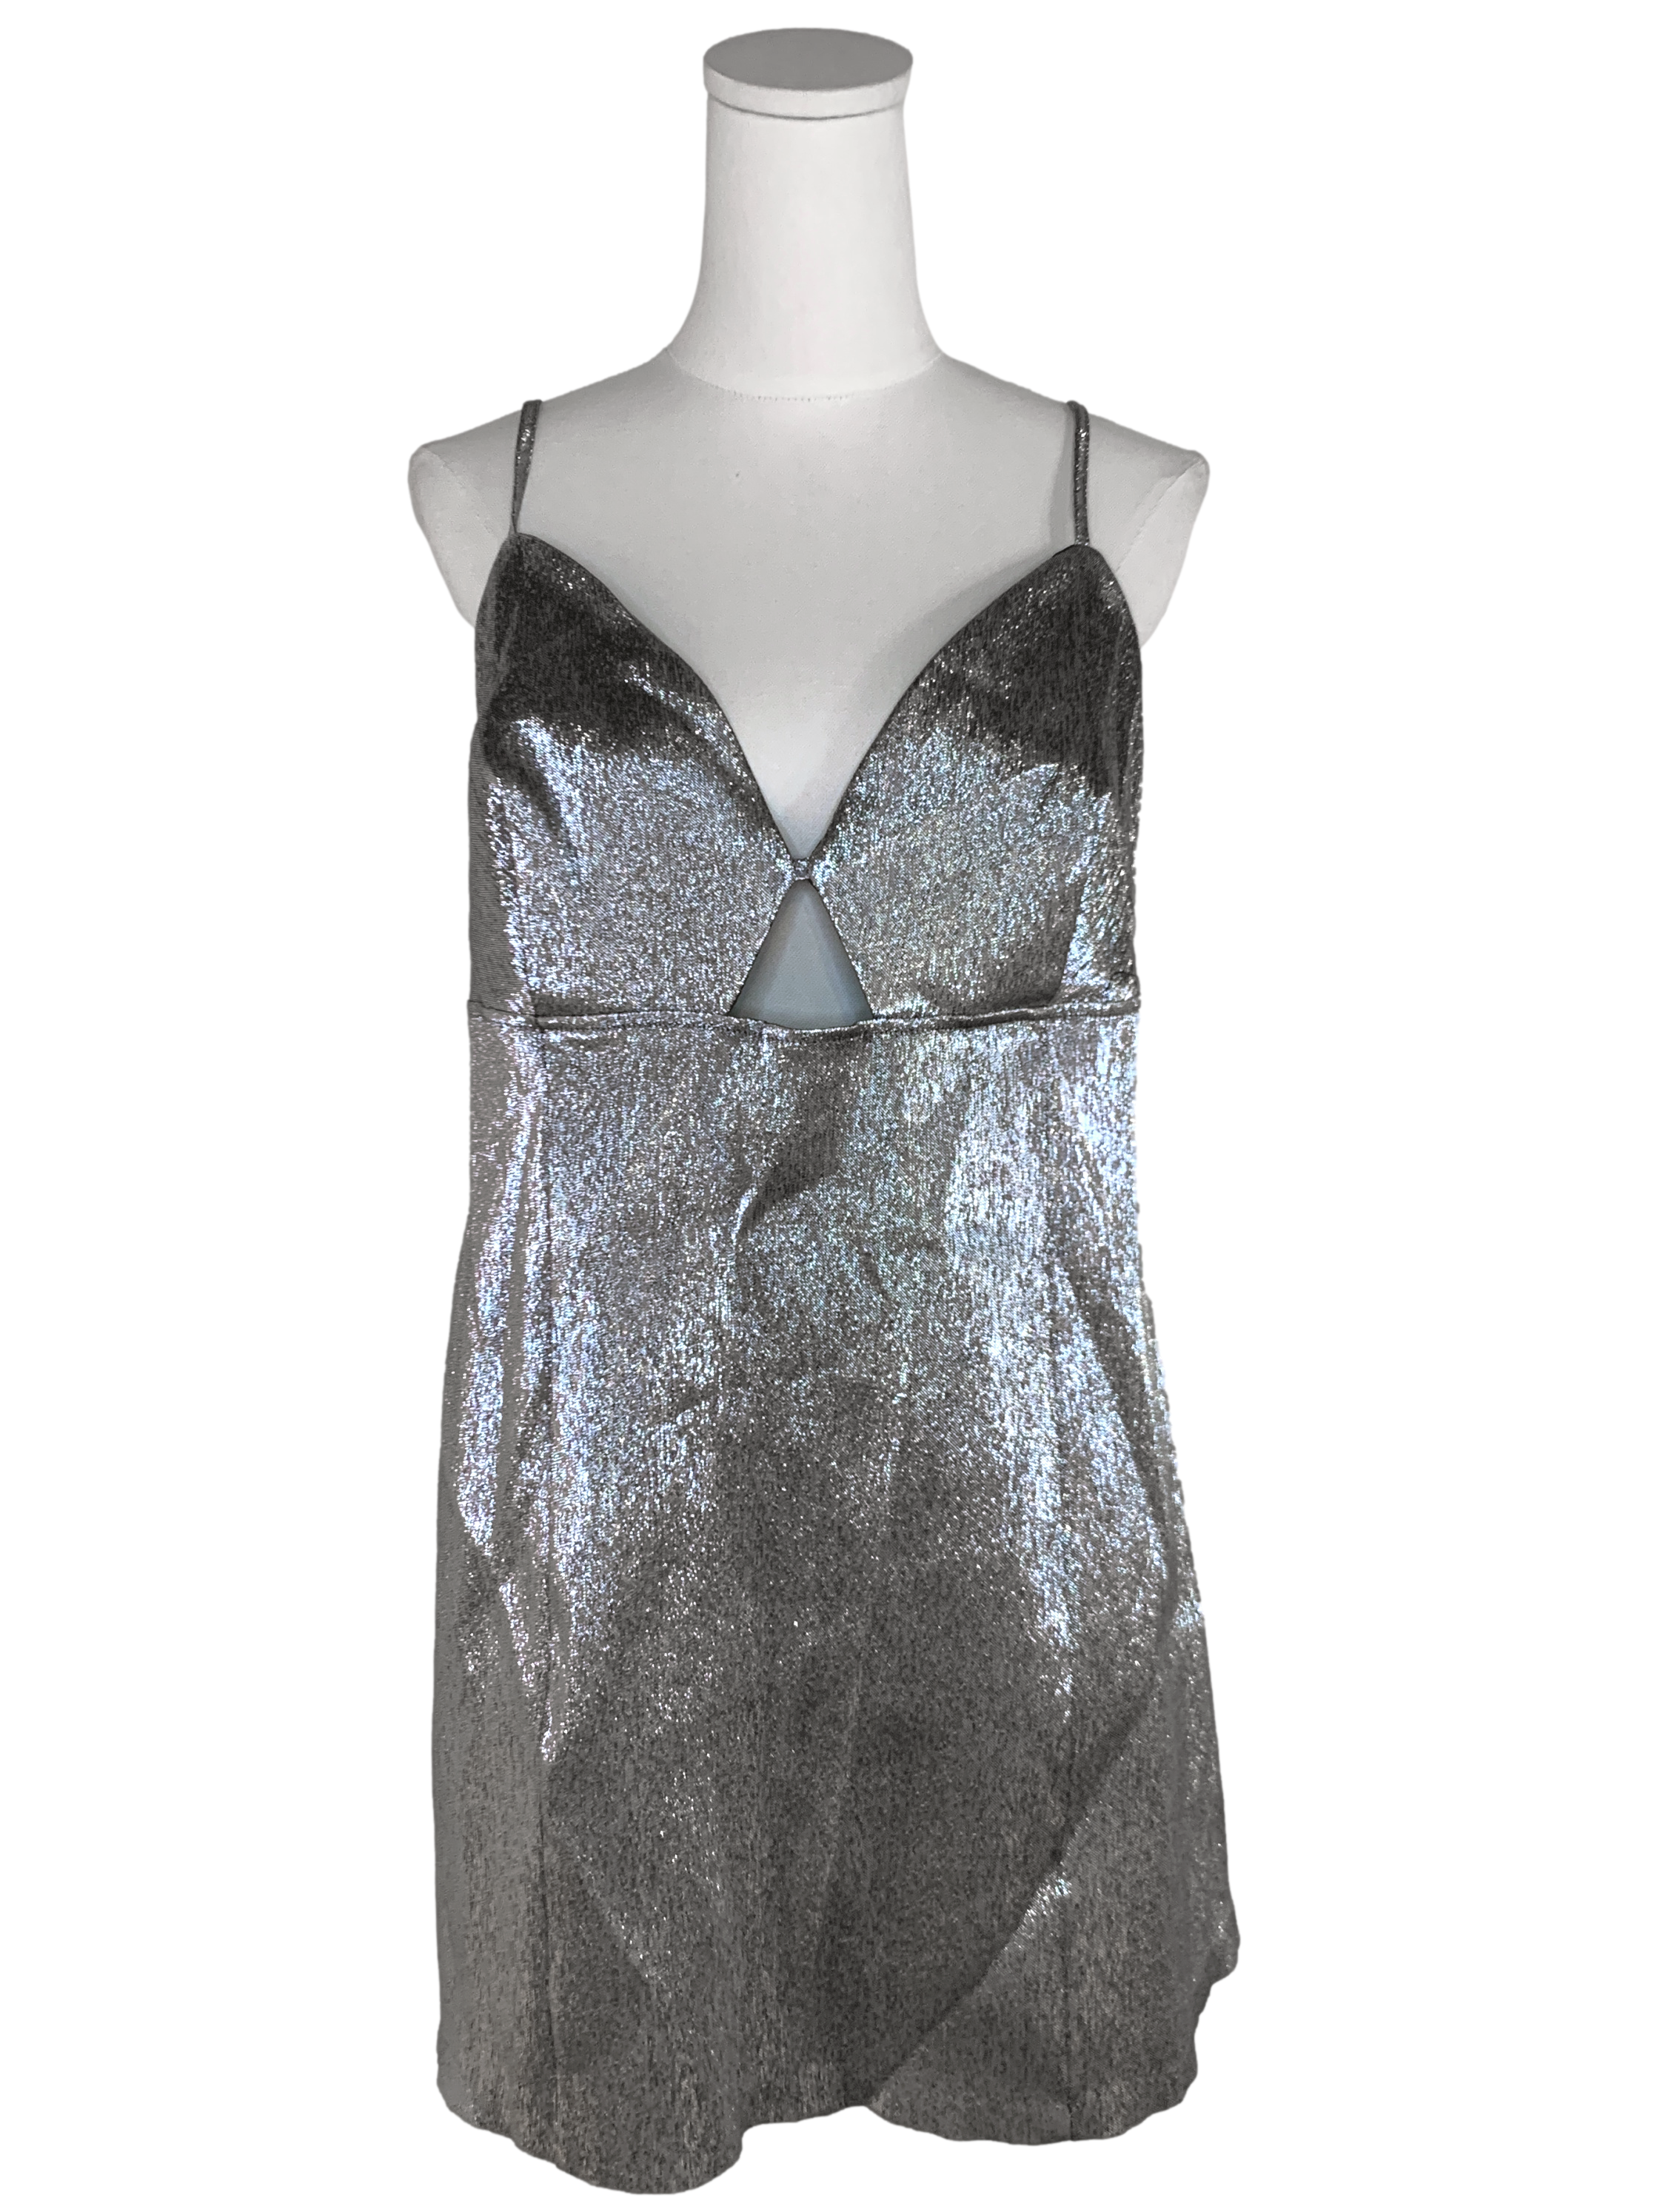 Silver Baby Doll Dress